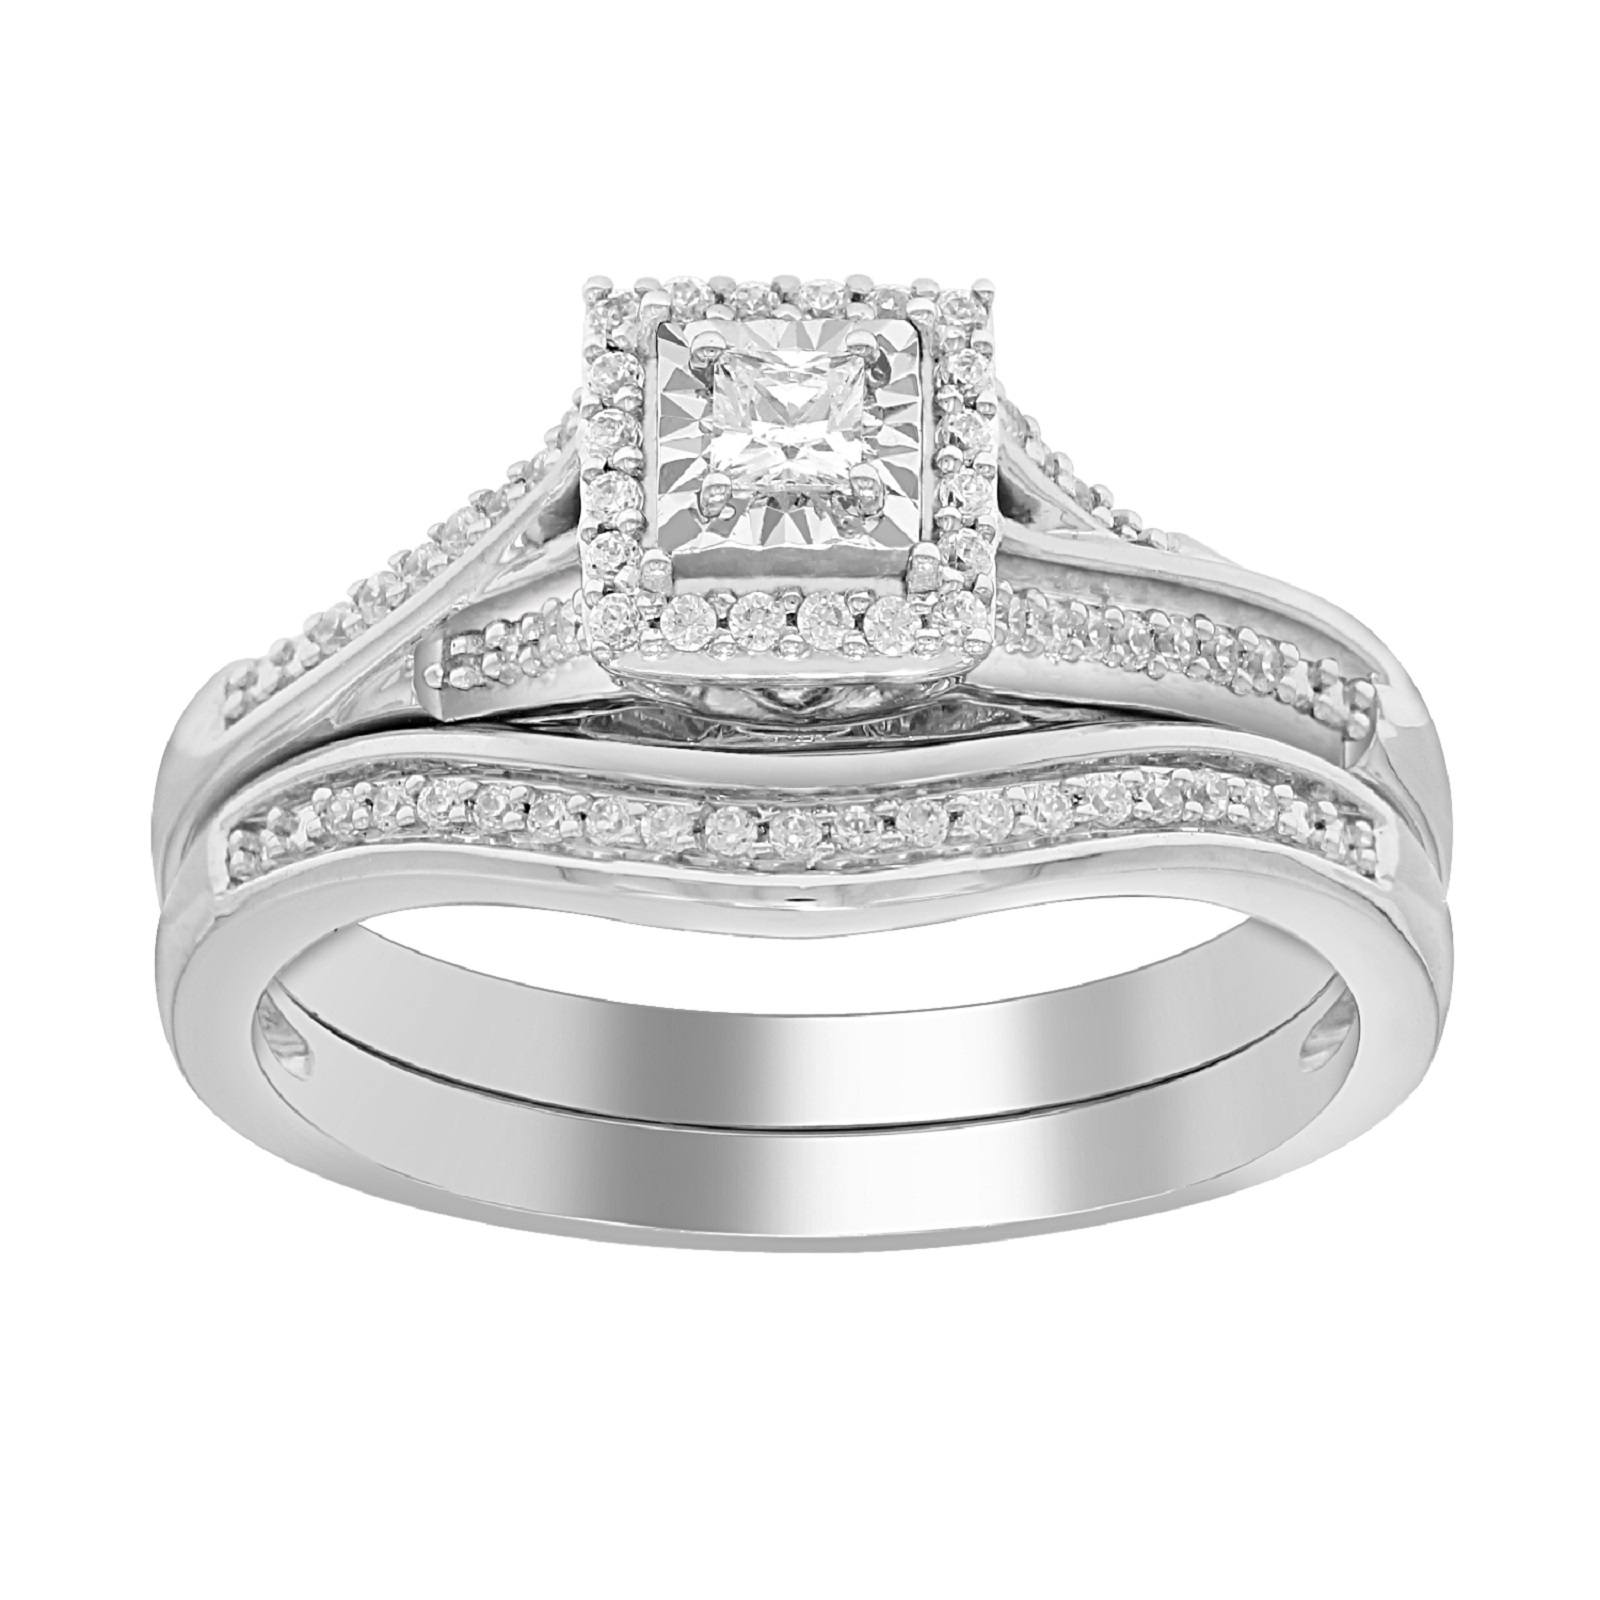 Sterling Silver 0.25CTTW Diamond Engagement Ring | Shop Your Way